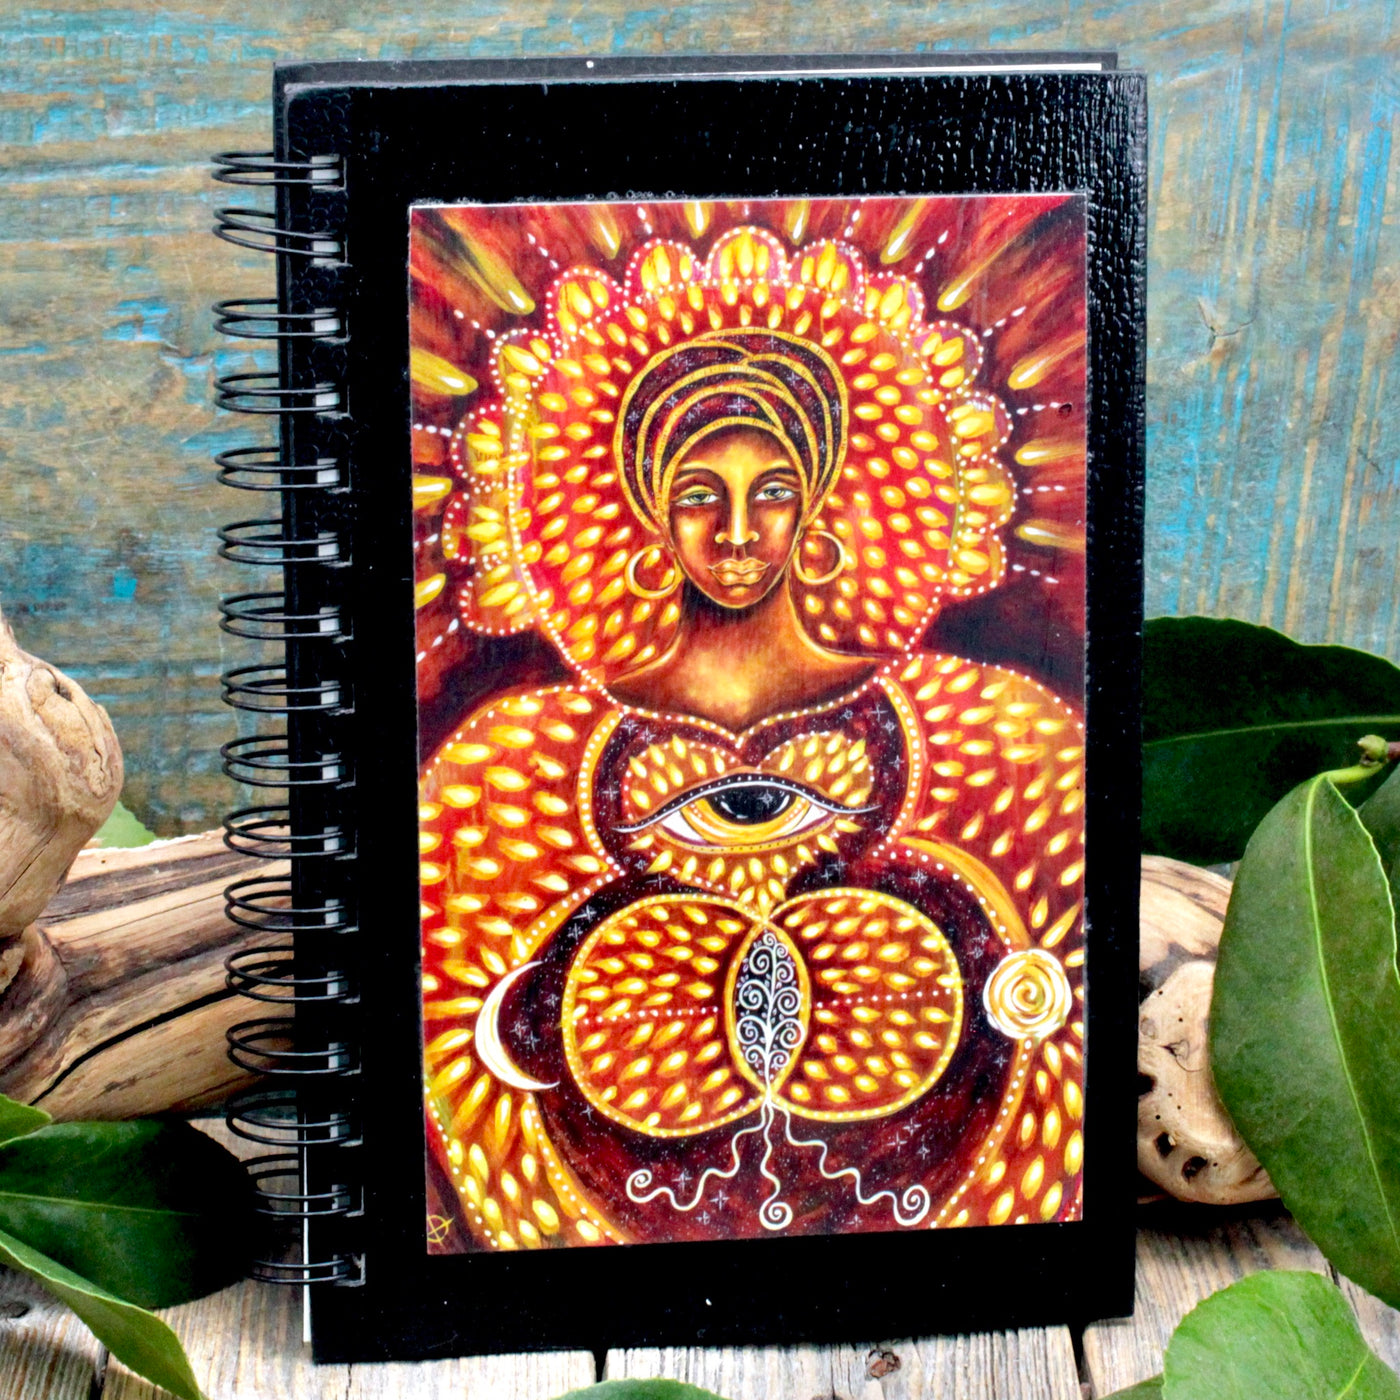 Our Lady of 10,000 Names Journal